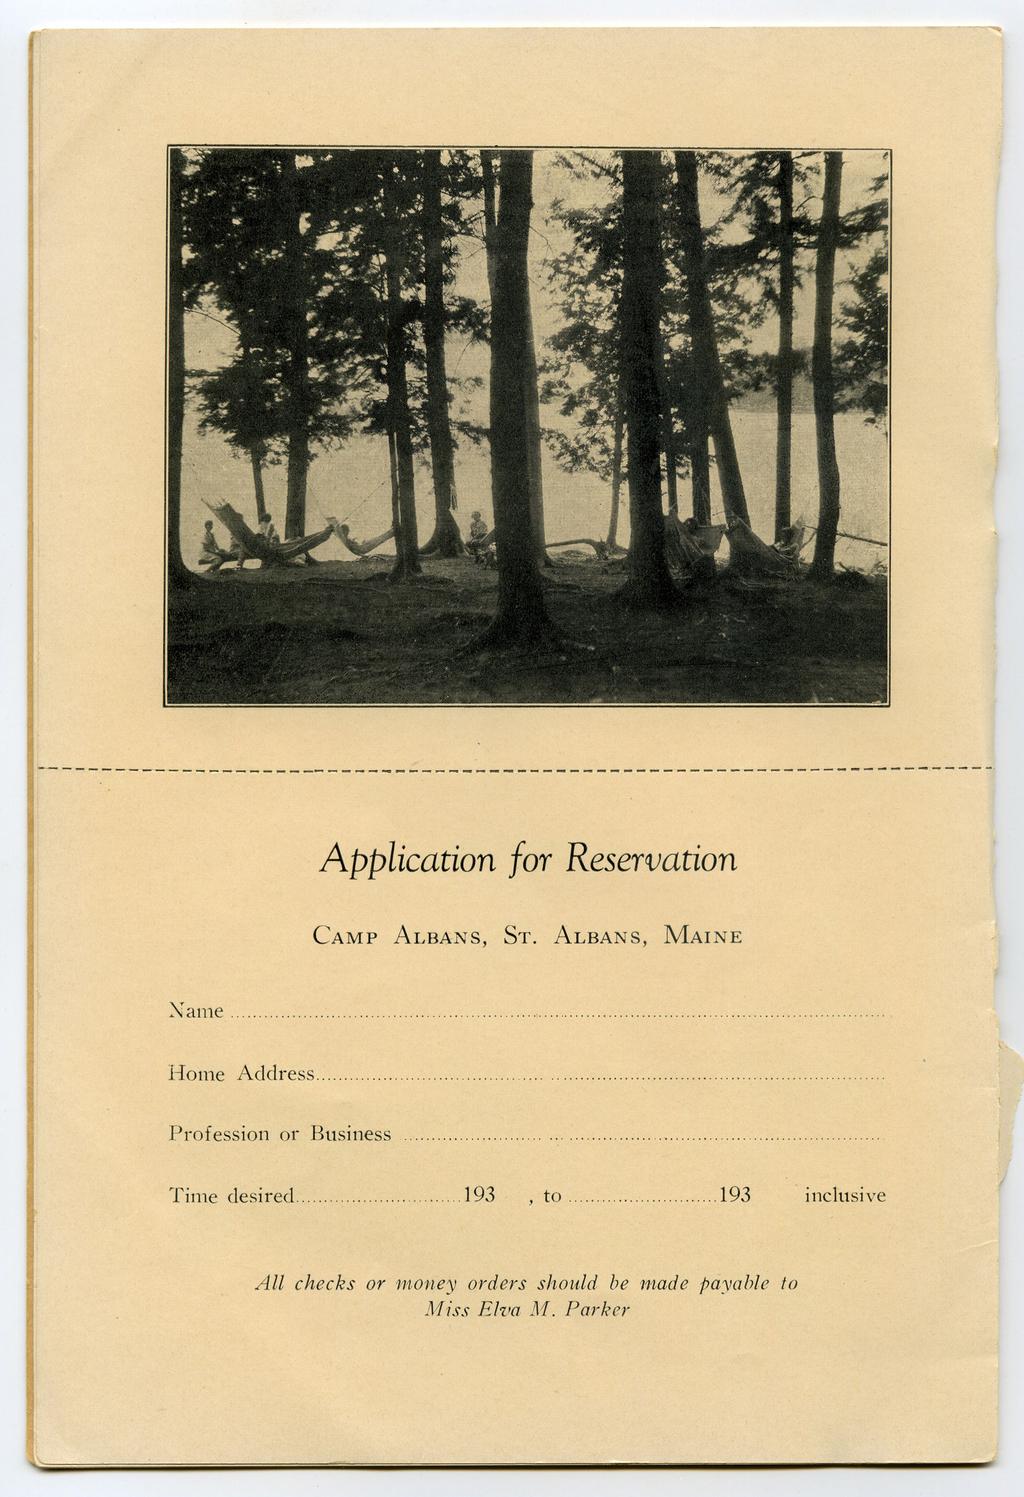 ------------------------------------------------------------------------------------- Application for Reservation Camp Albans, St. Albans, Maine Name.